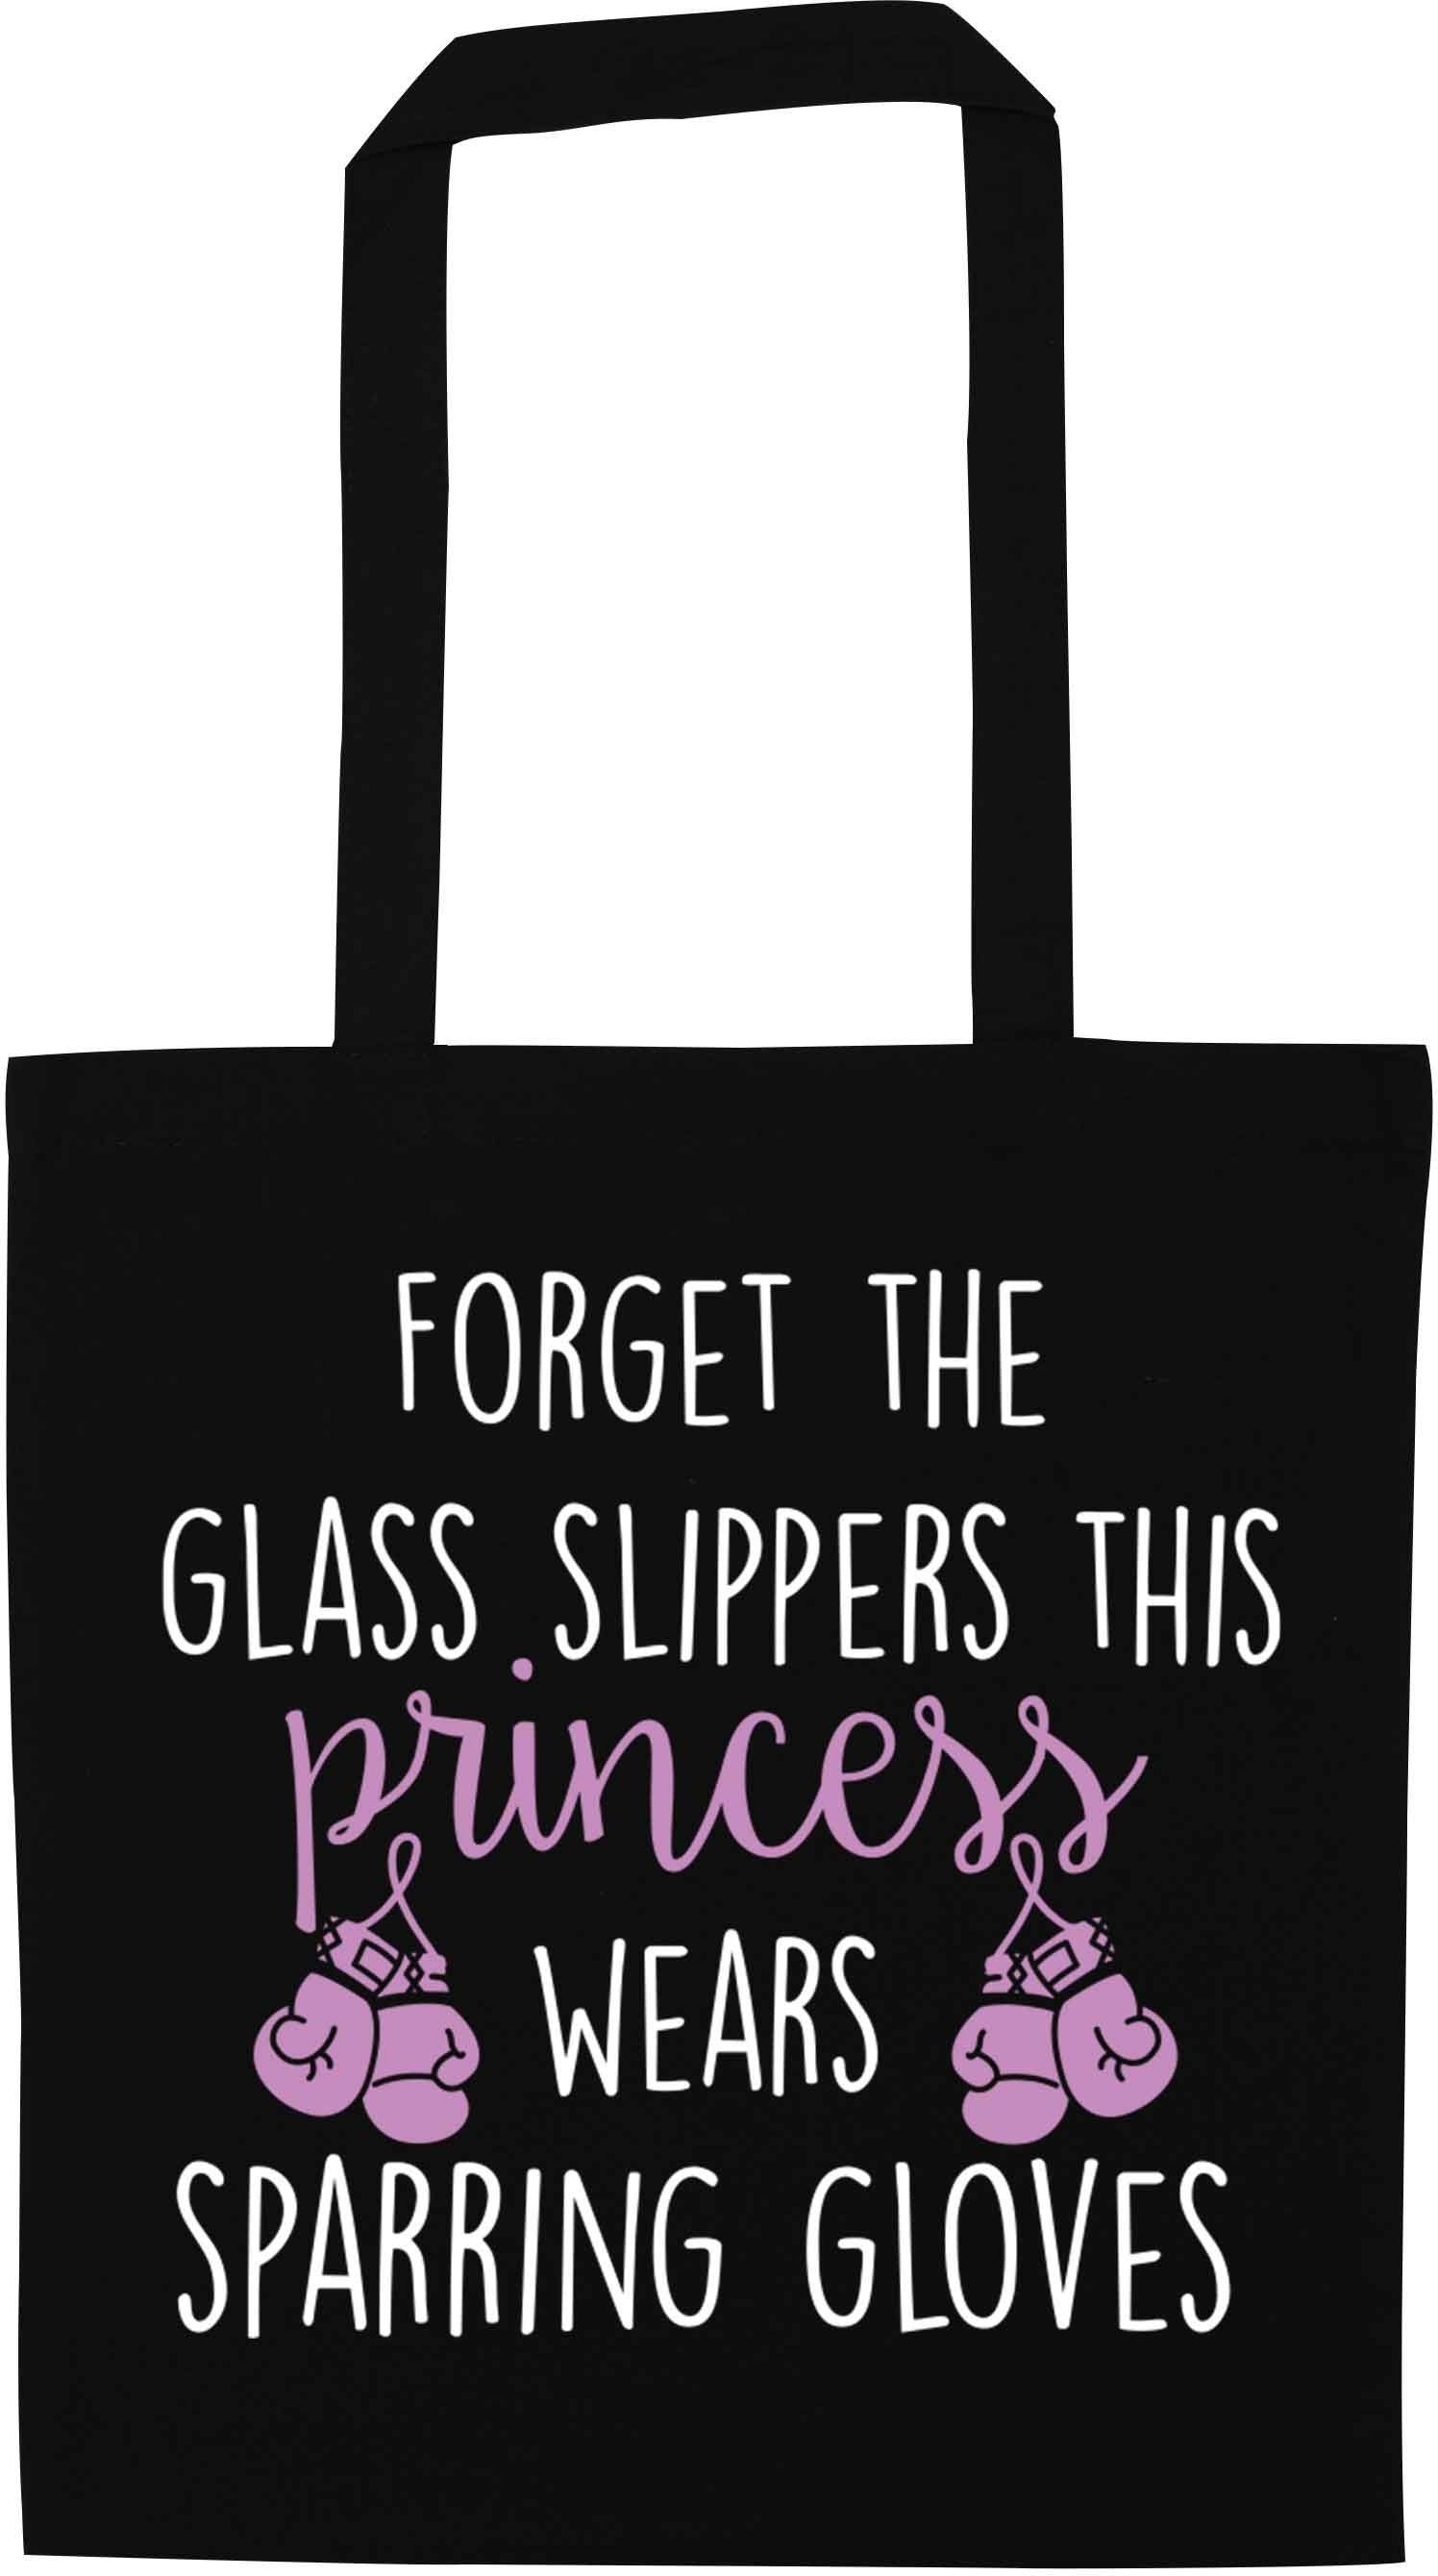 Forget the glass slippers this princess wears sparring gloves black tote bag